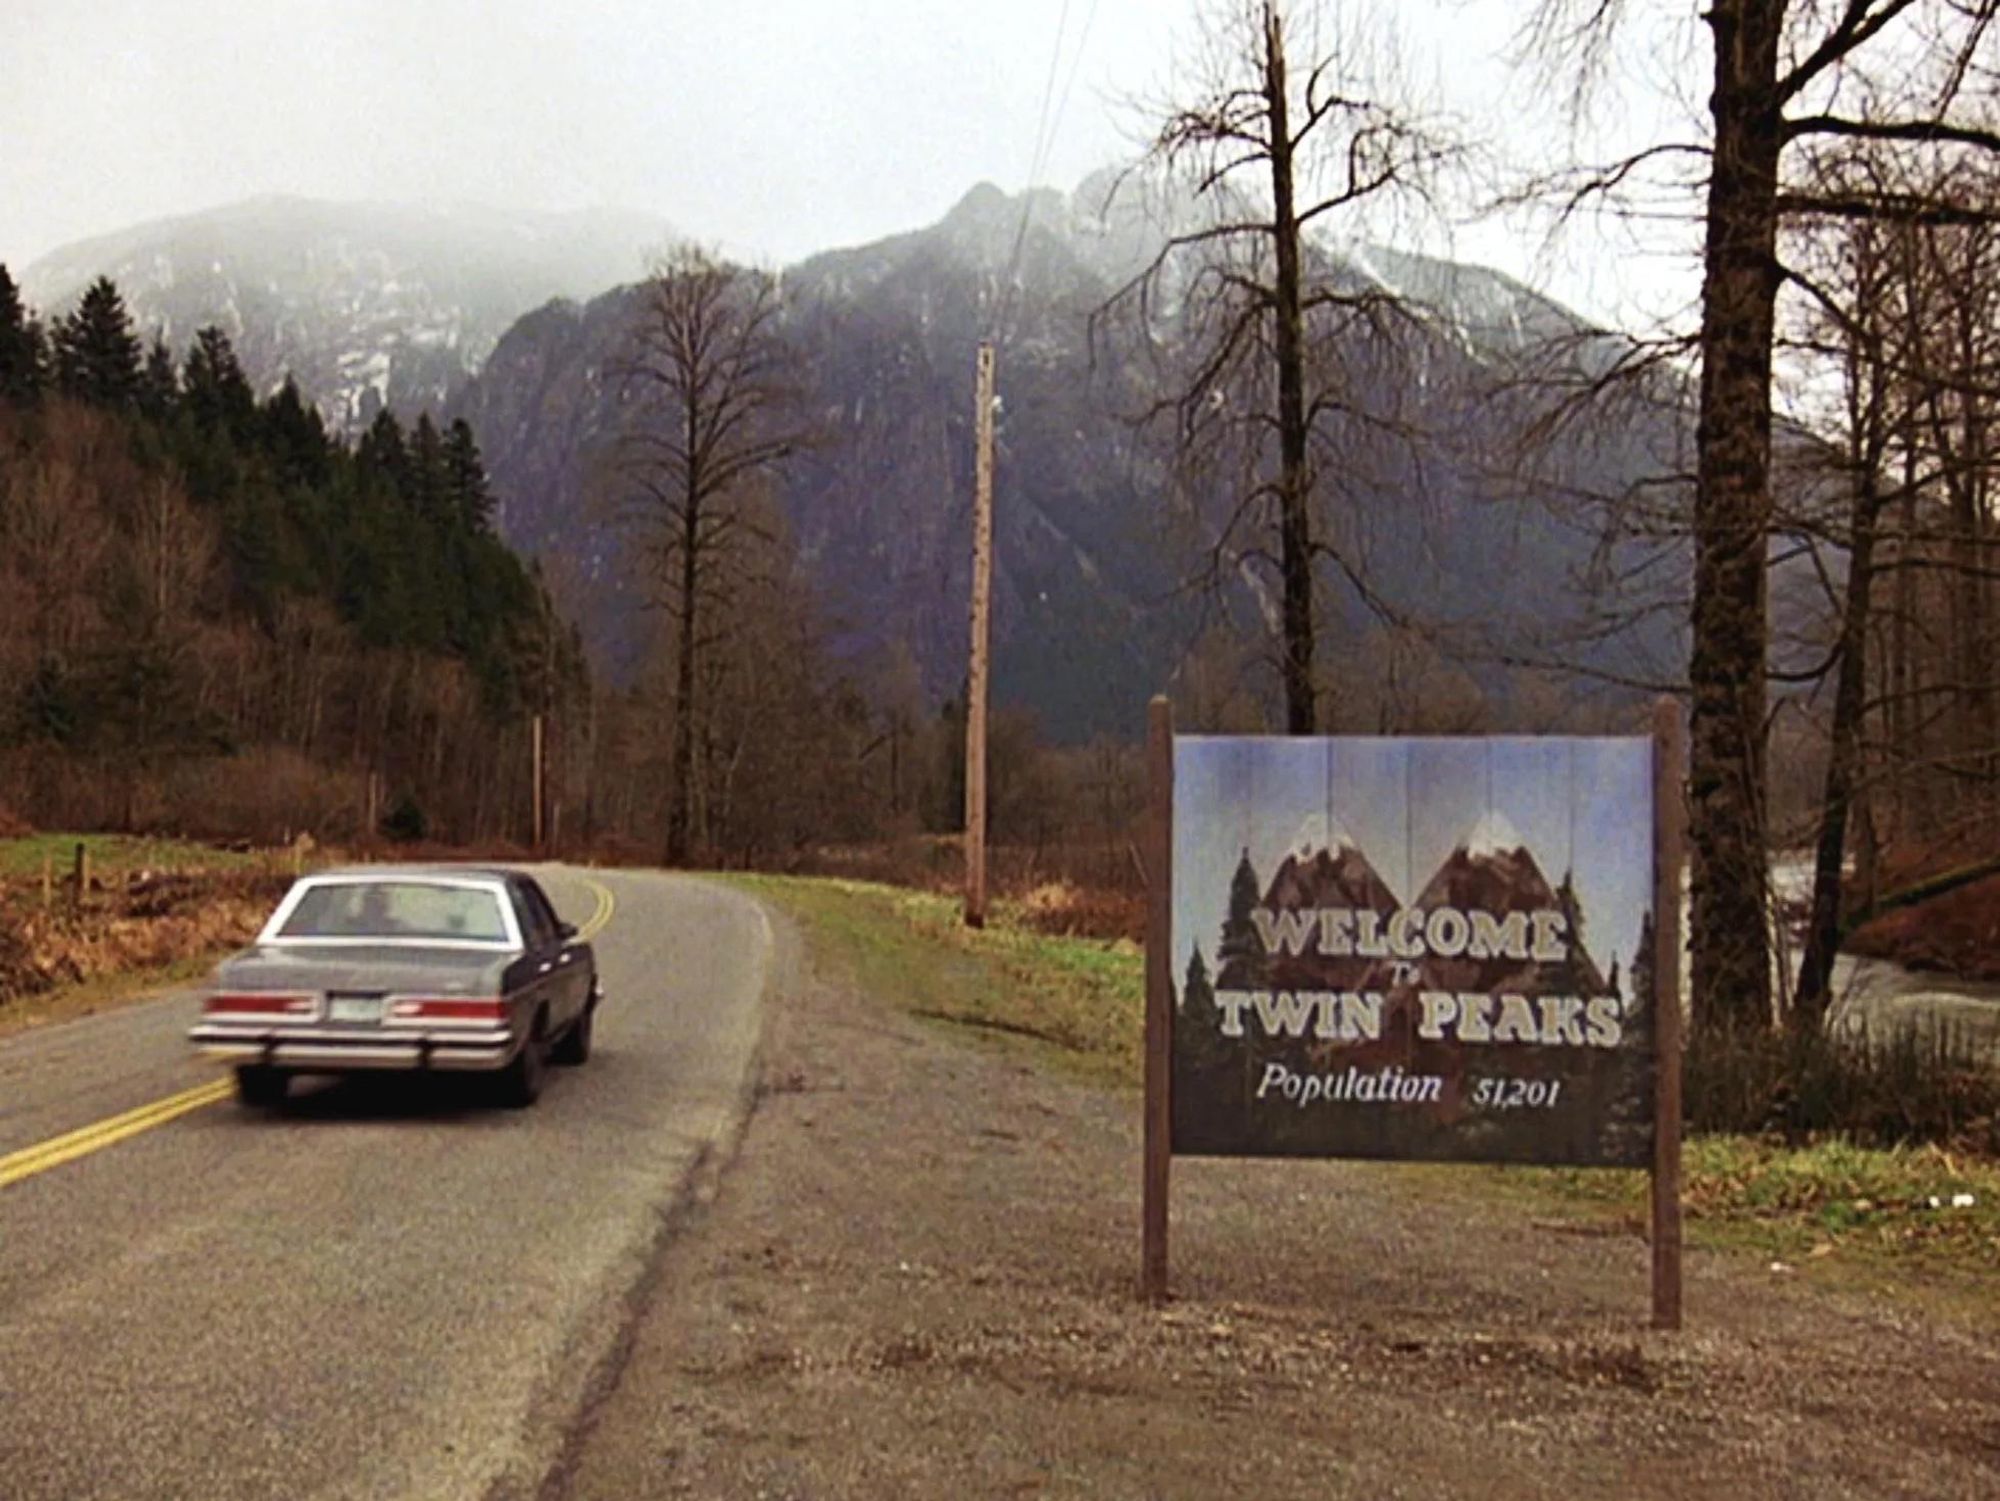 The opening roadside image from Twin Peaks with the town sign located beneath a mountainous vista